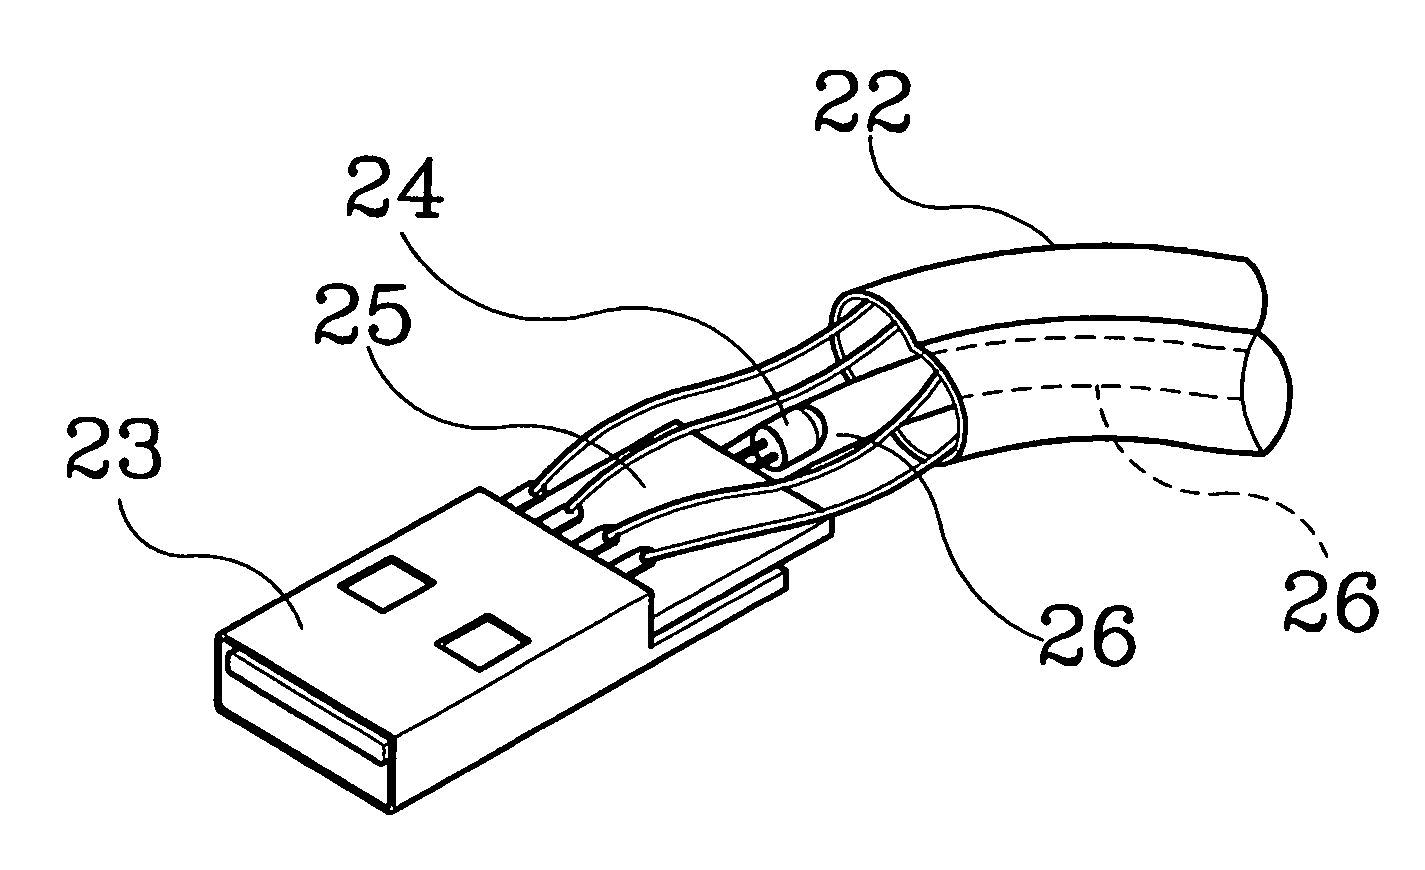 Indicator circuit arrangement of a transmission cable for computer